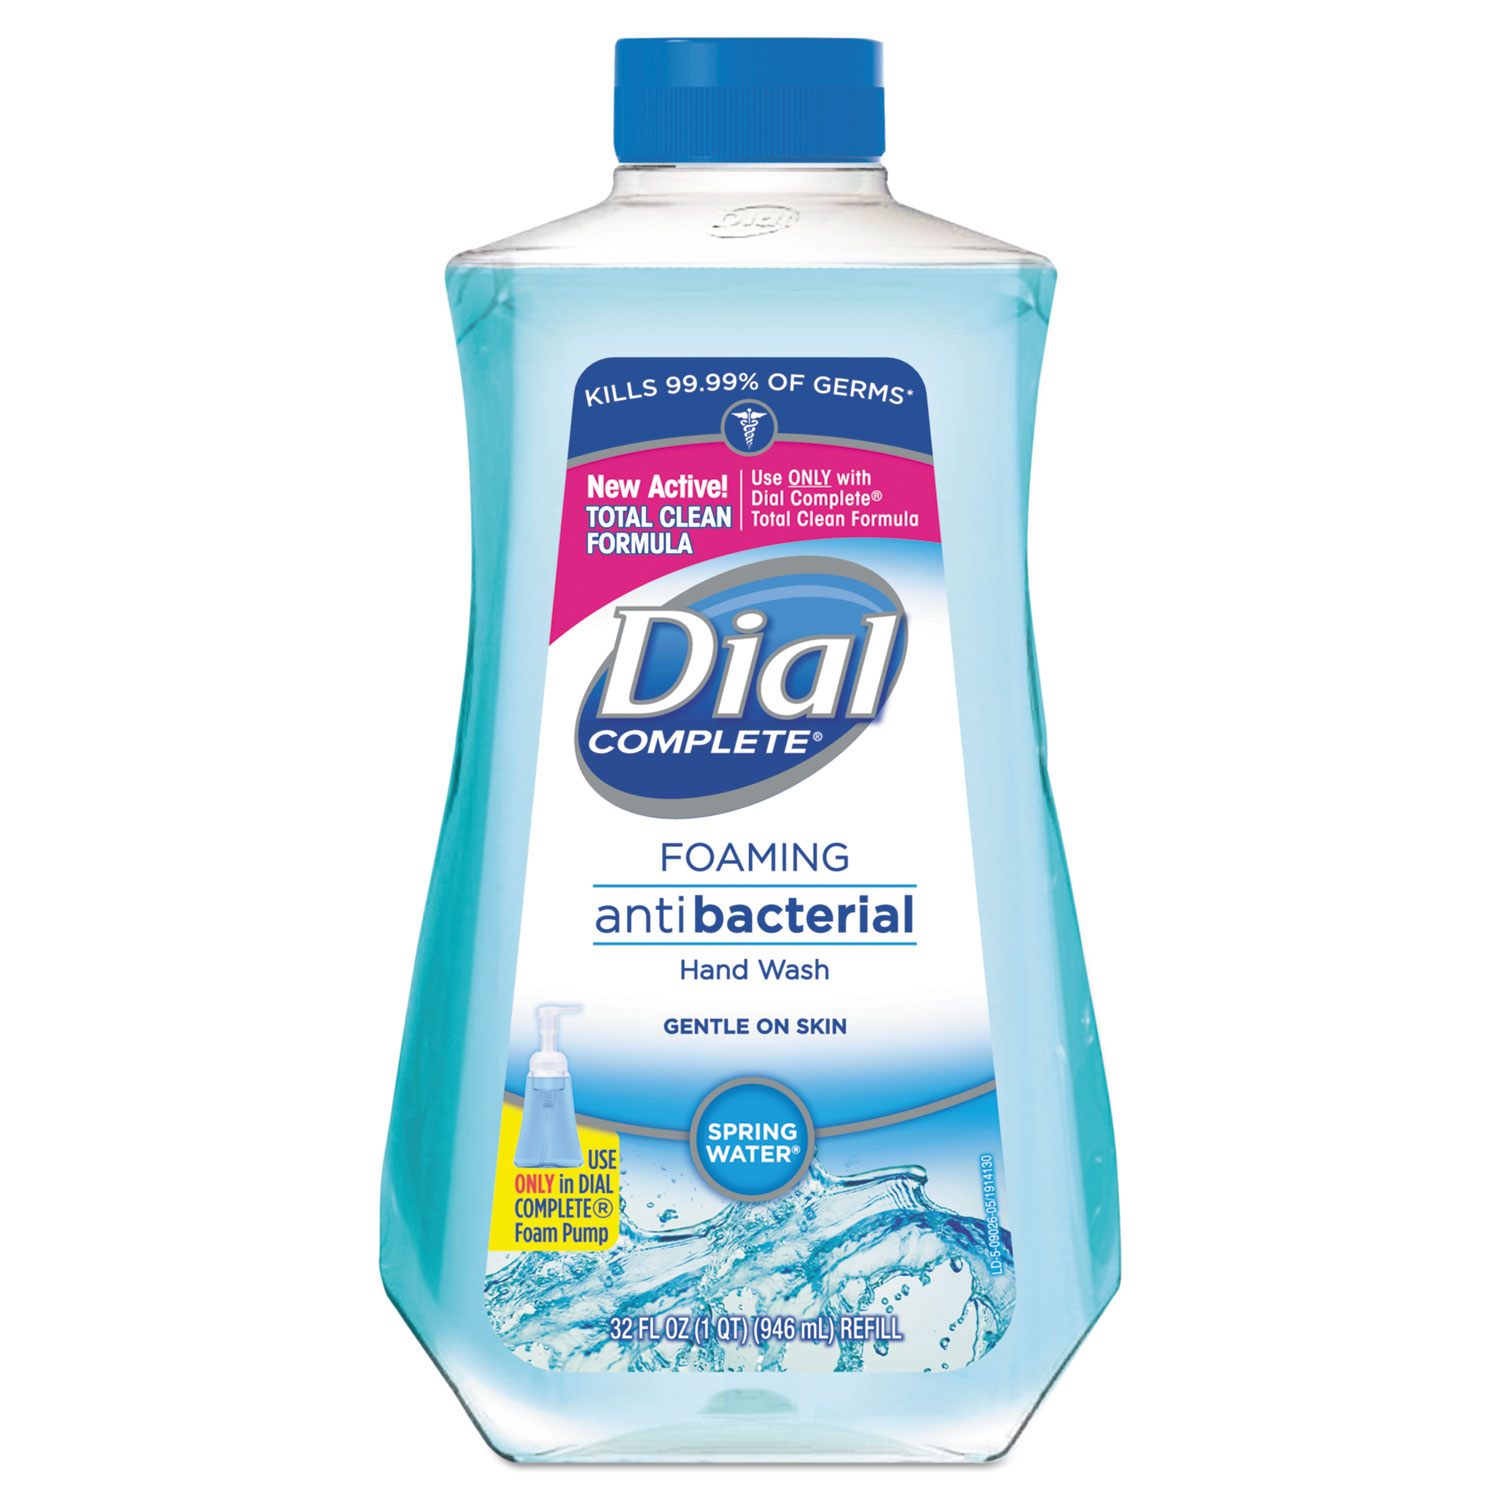  Dial 09026 Antibacterial Foaming Hand Wash, Spring Water Scent, 32 oz Bottle (DIA09026EA) 